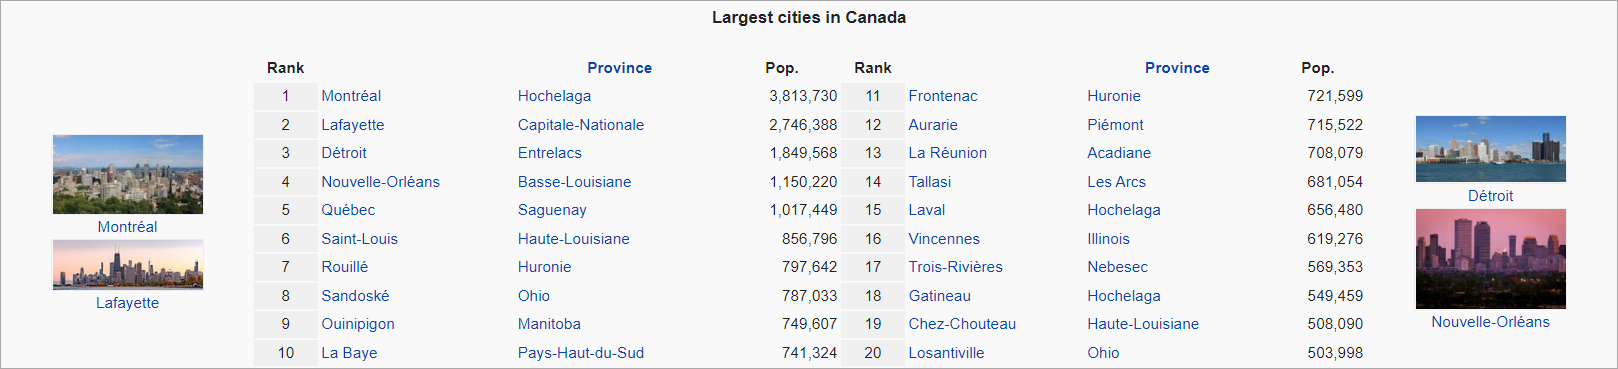 Largest cities in Canada.png